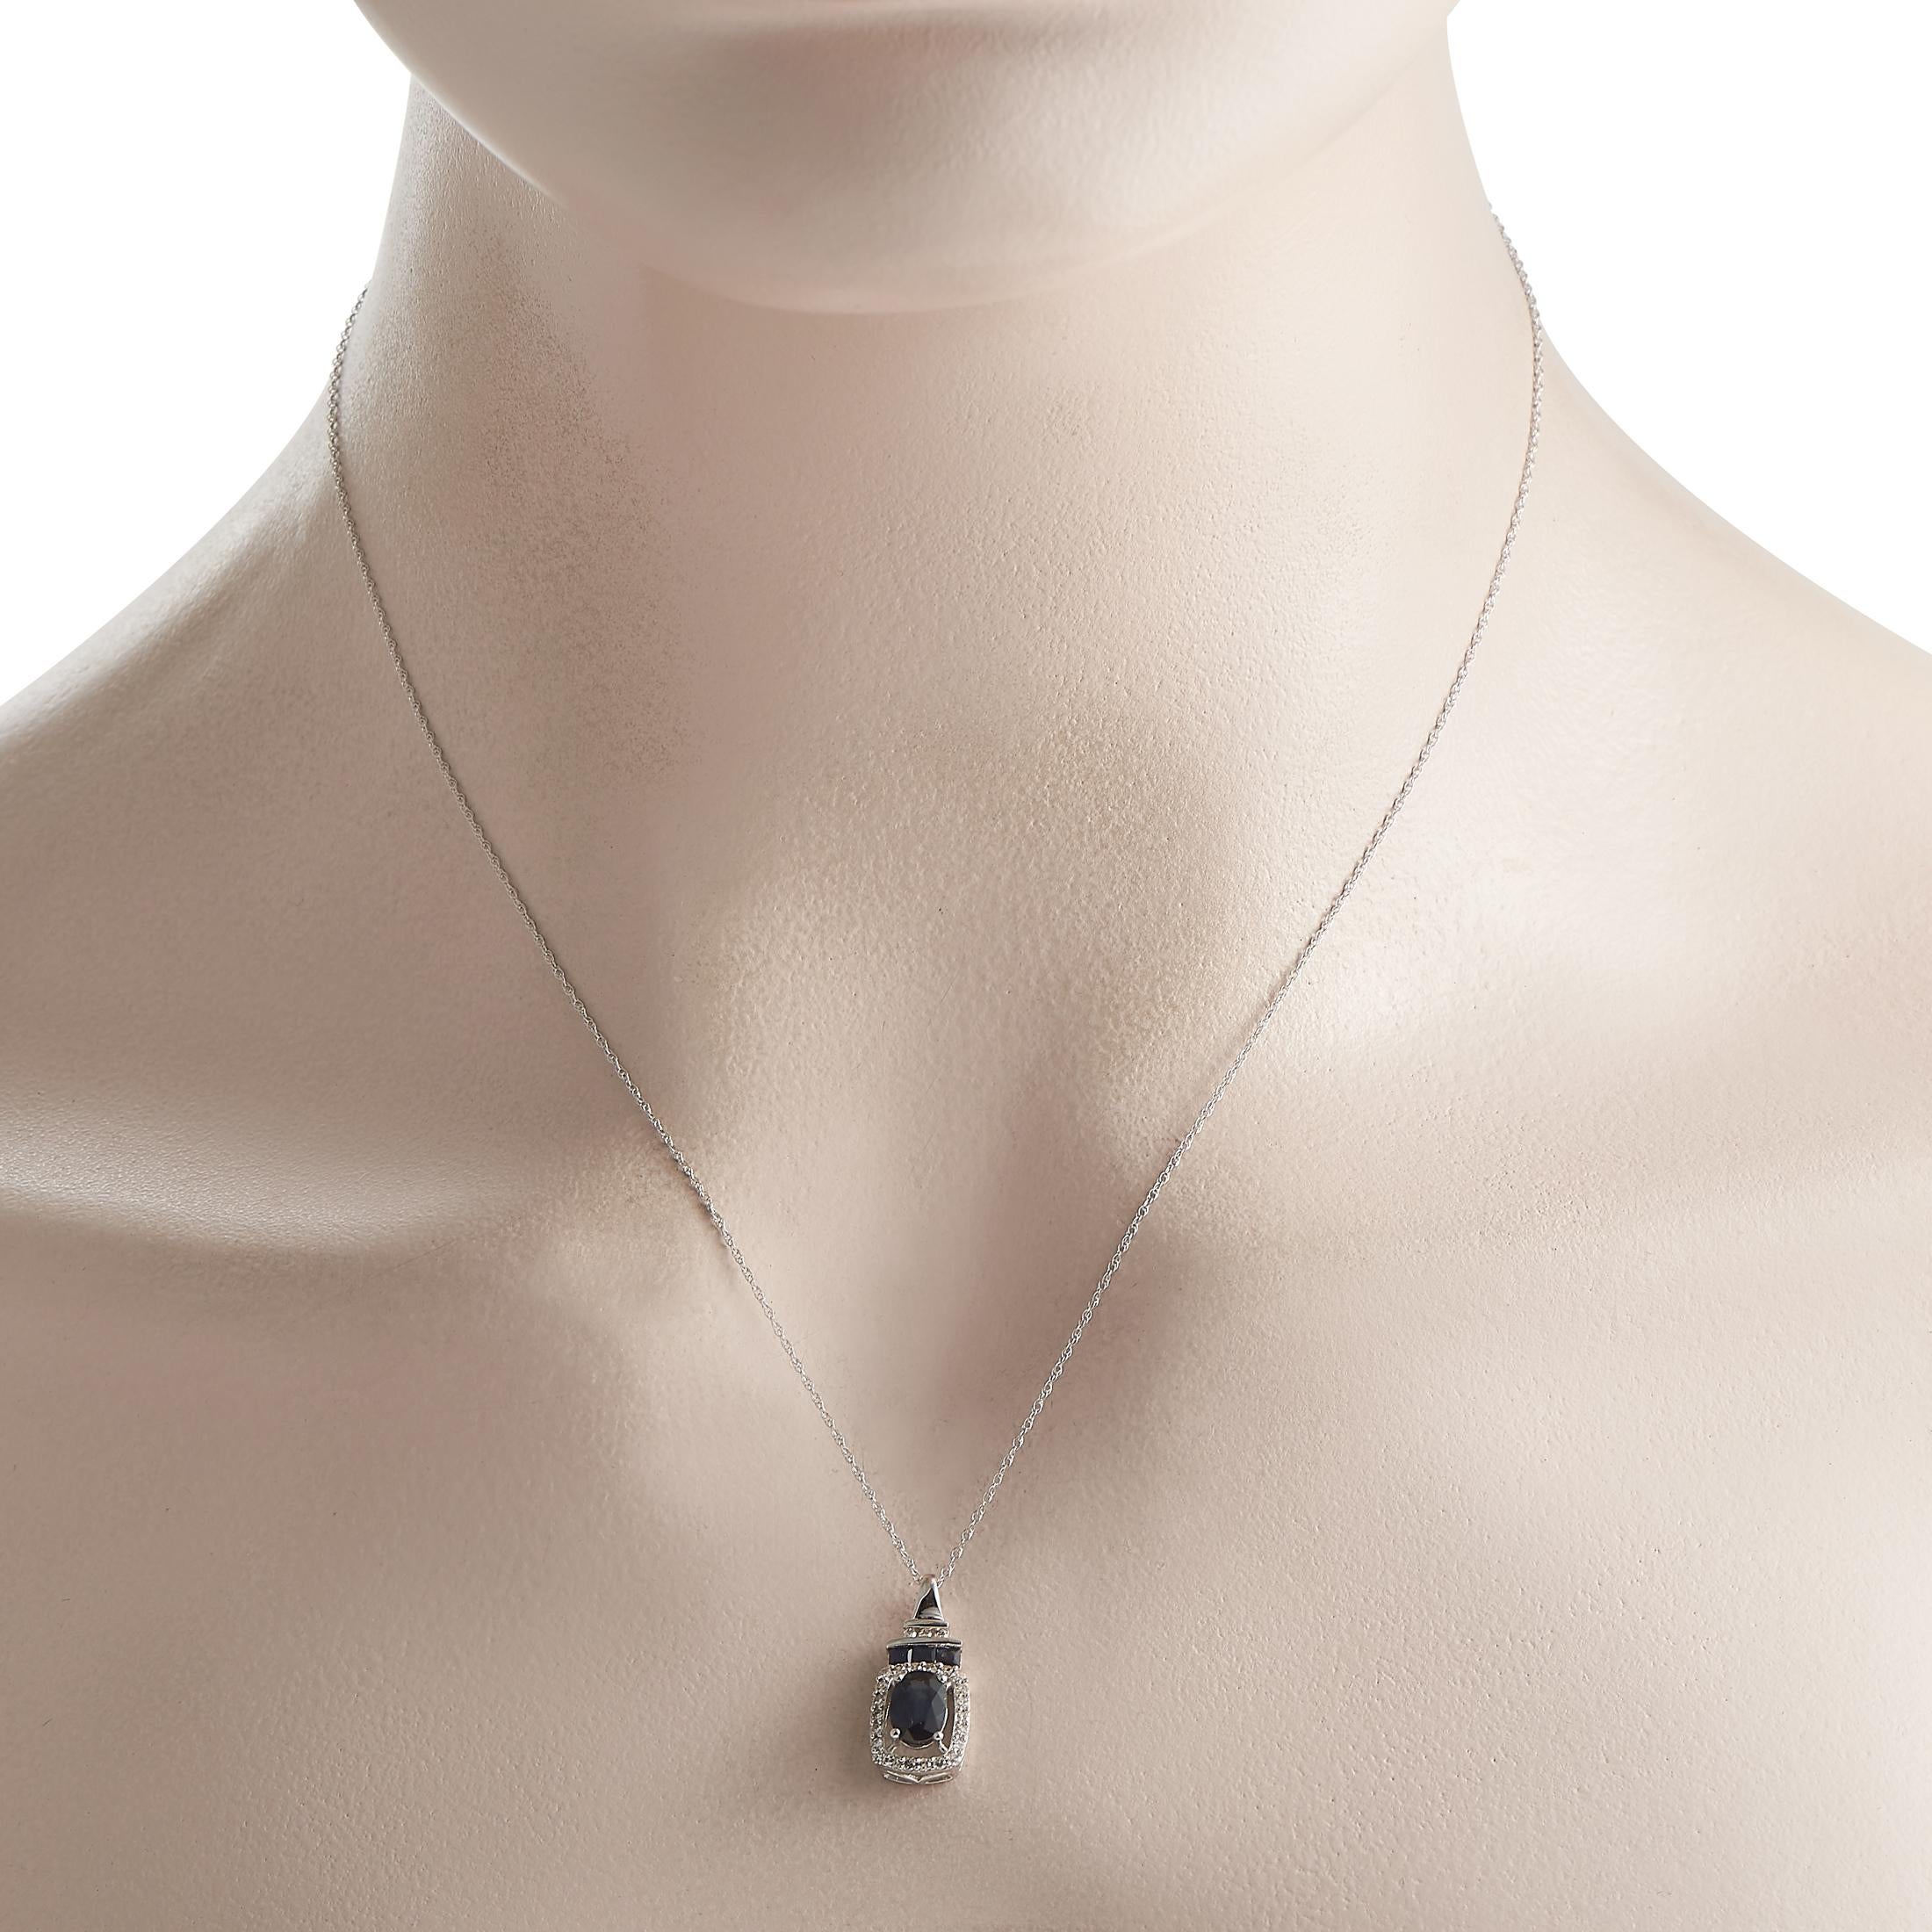 Think your daily office wear could use a bit more bling? Consider this diamond and sapphire necklace. An LB Exclusive piece, it comes with a 17 long chain in 14K white gold. Its polished bail has a stepped profile, punctuated by a trio of diamonds